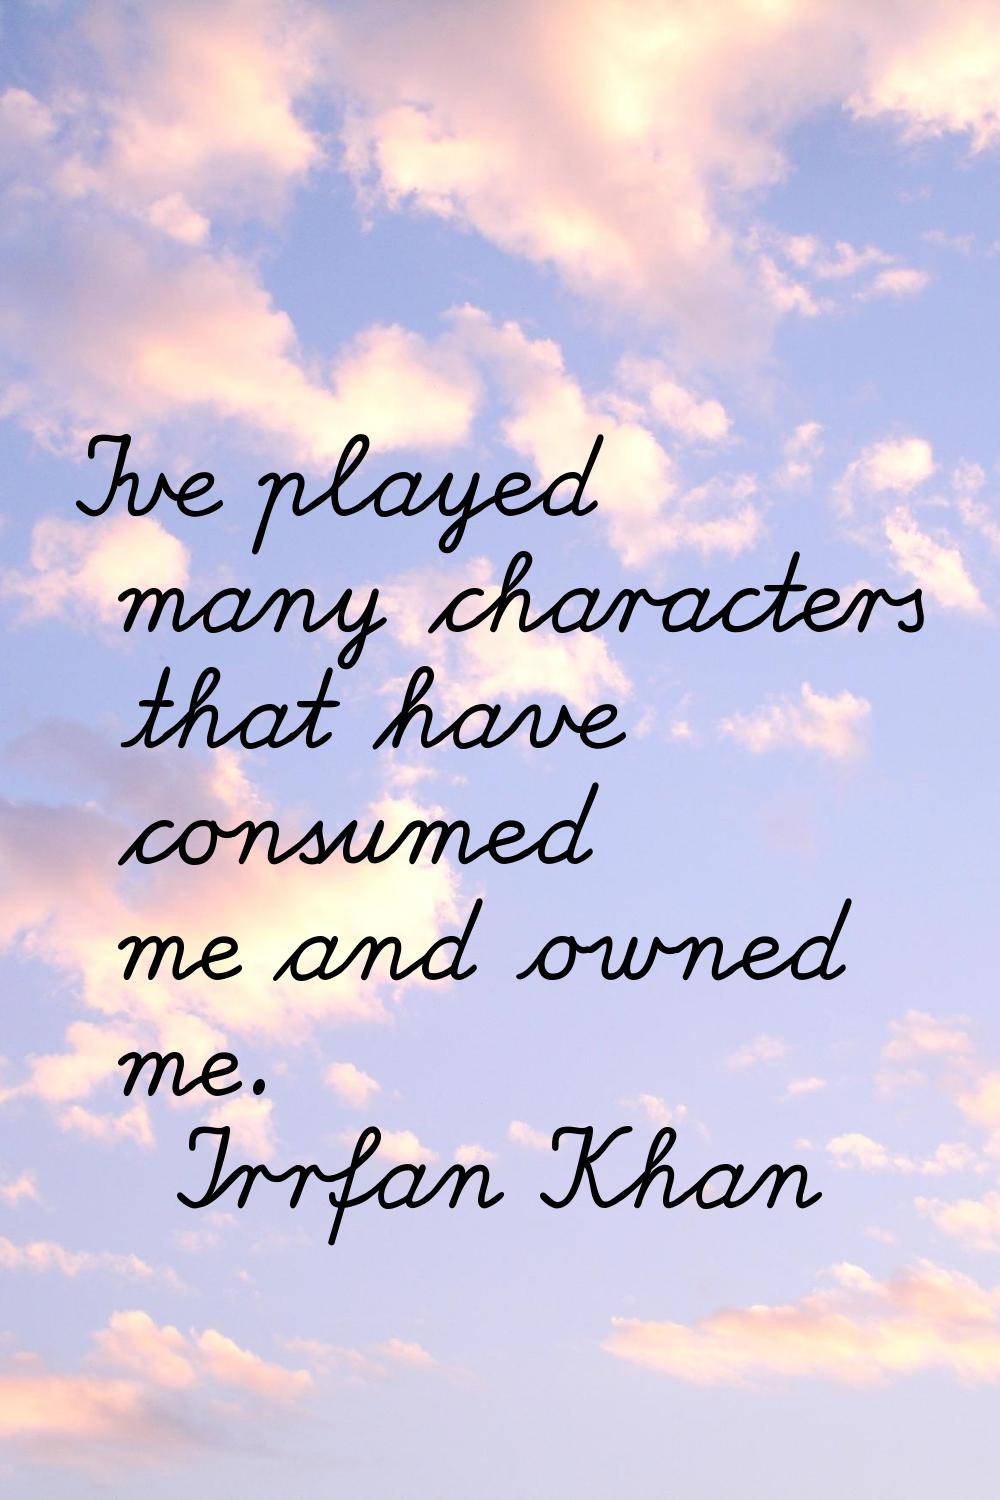 I've played many characters that have consumed me and owned me.